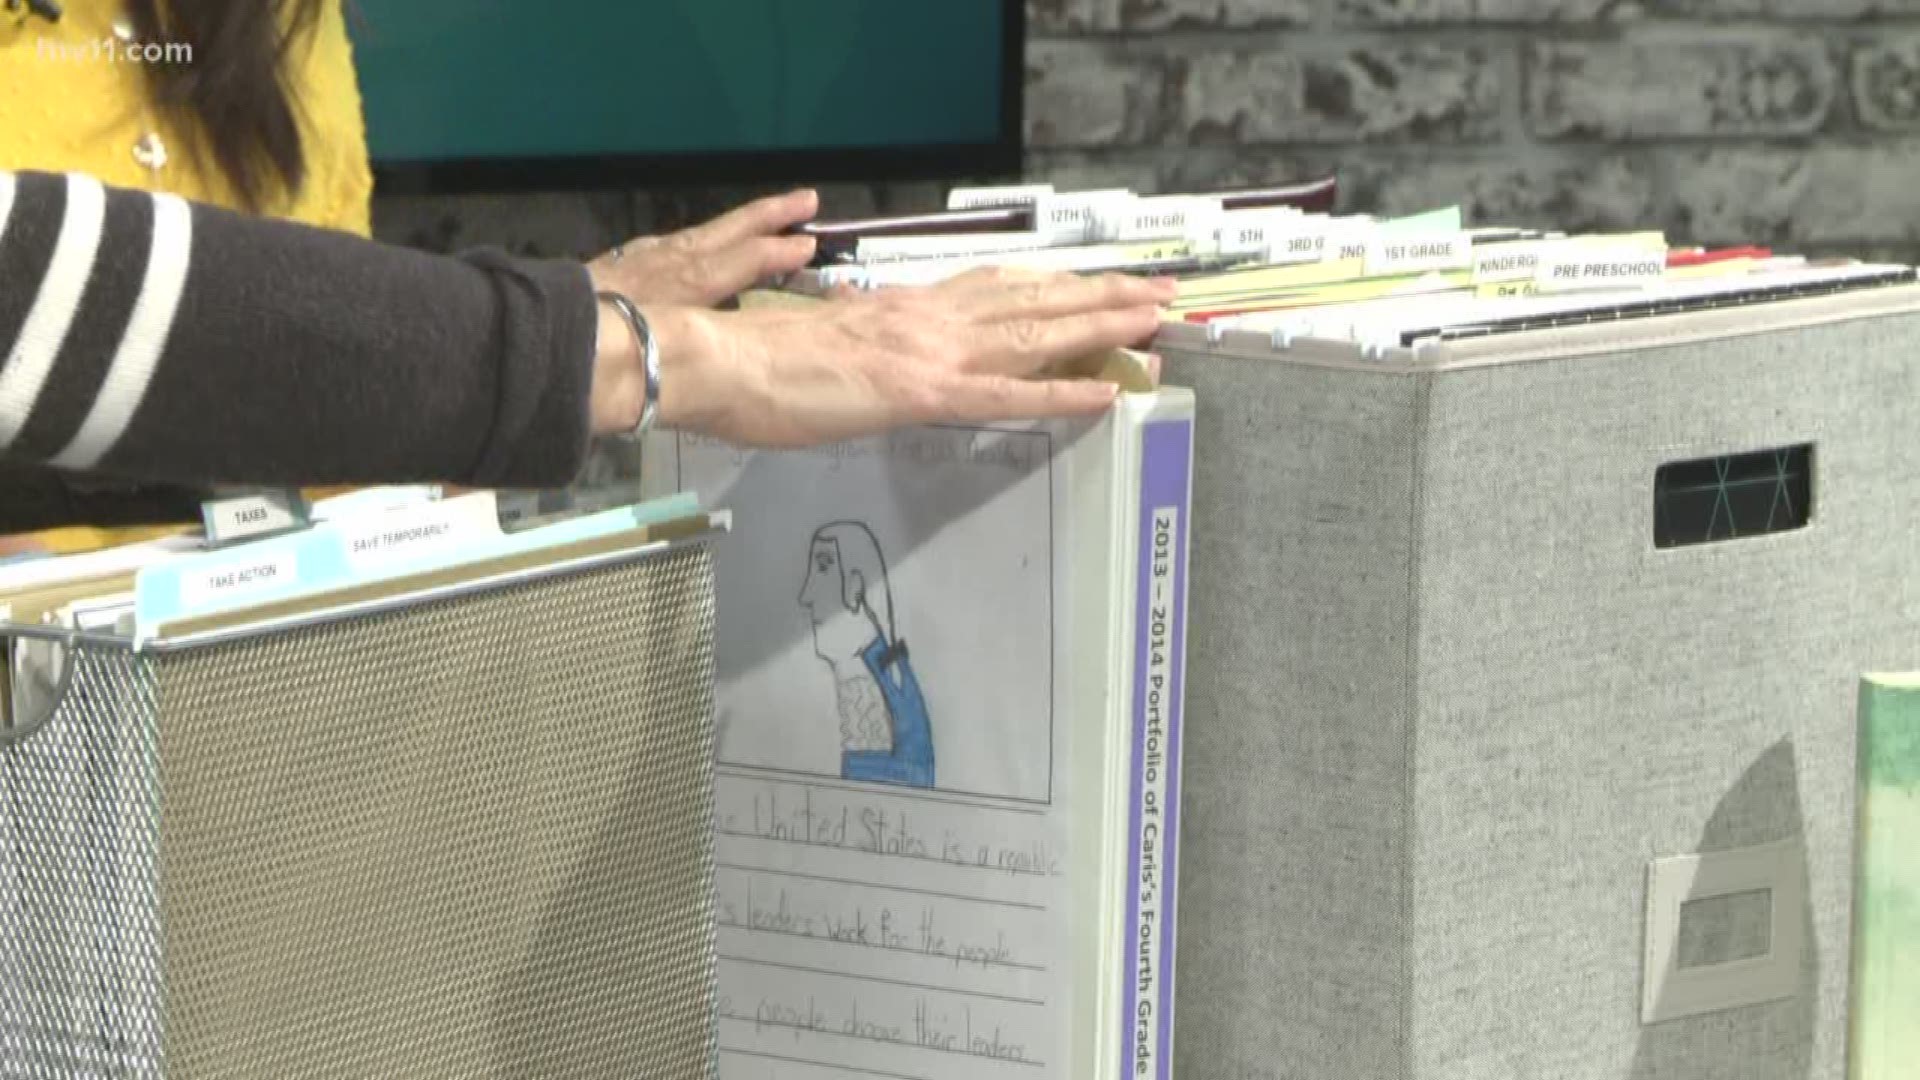 When kids bring home artwork and field trip papers, it's tough to know what to keep and what to throw out. Sue Fehlberg with Tidy Nest showed us how to organize it all.